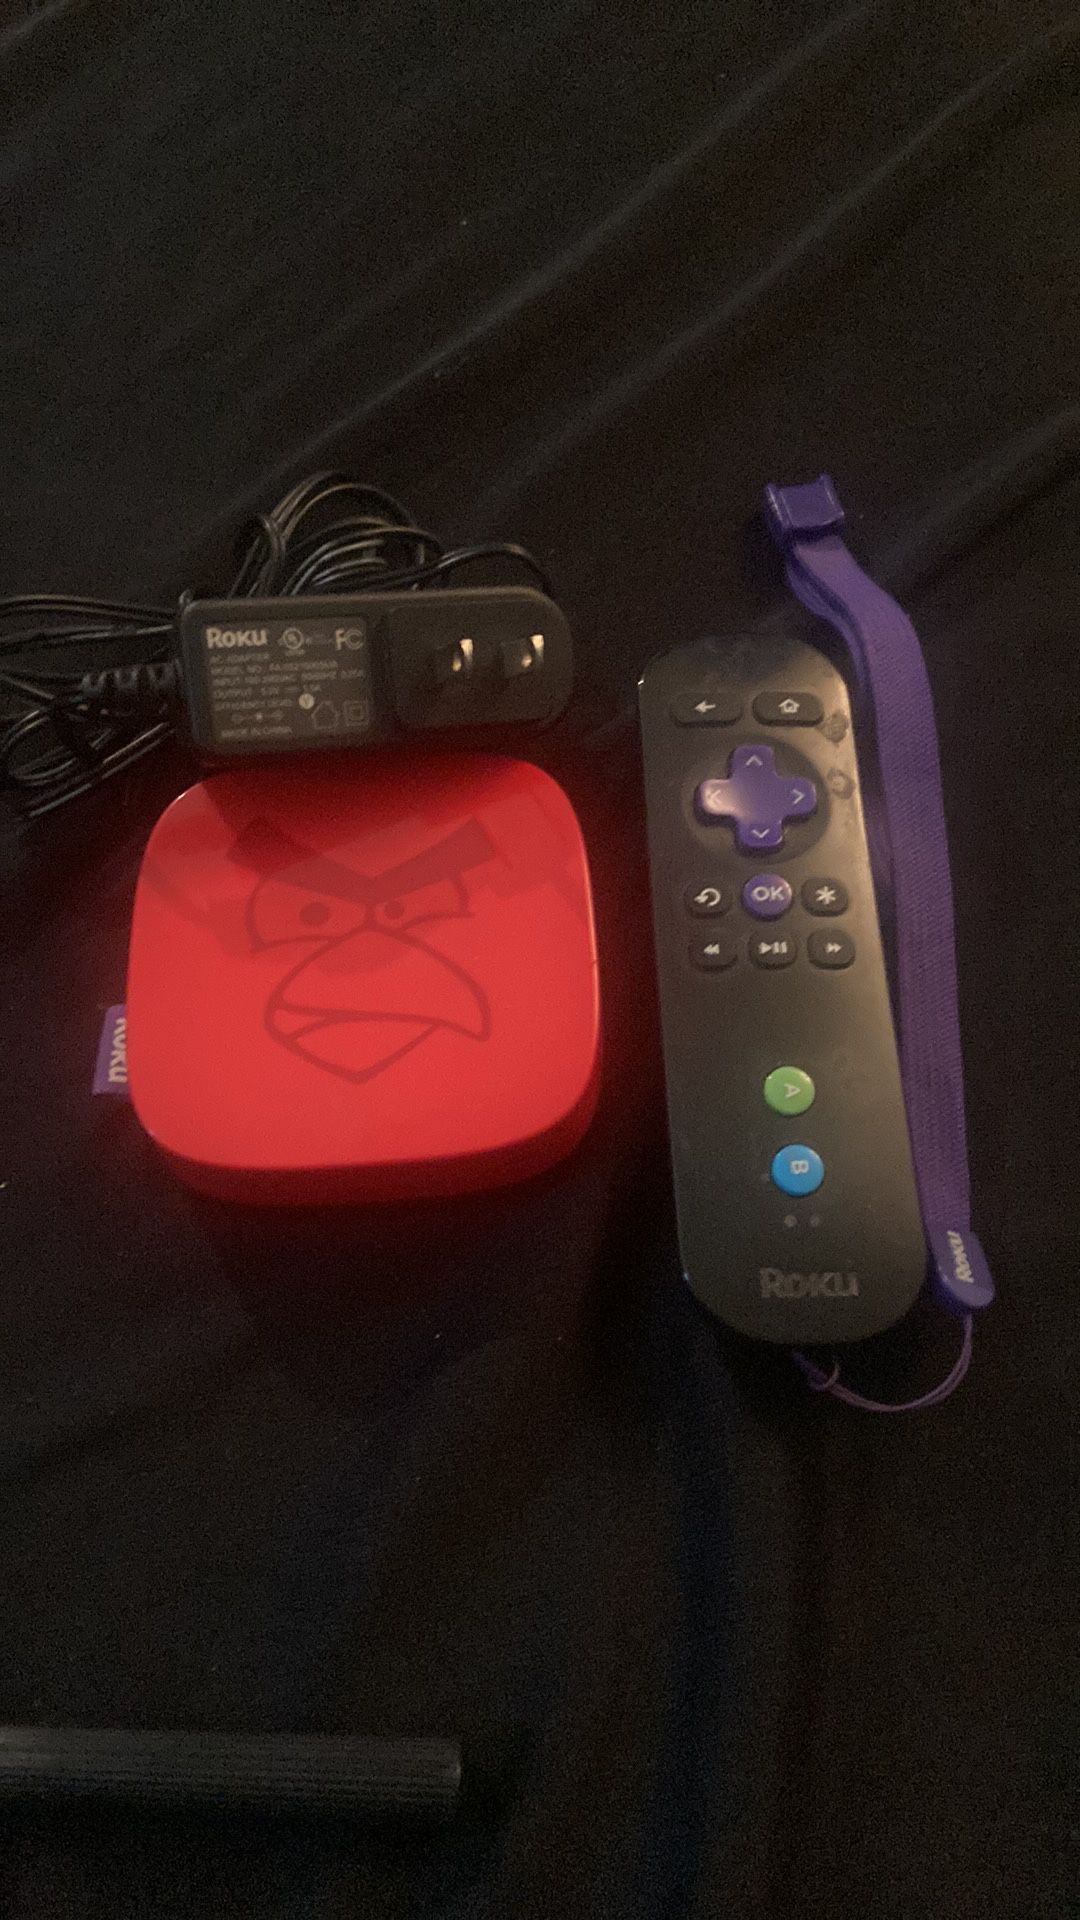 Pre-Owned Roku 2, Model # 3100X with AC Adapter/Power Supply & Remote